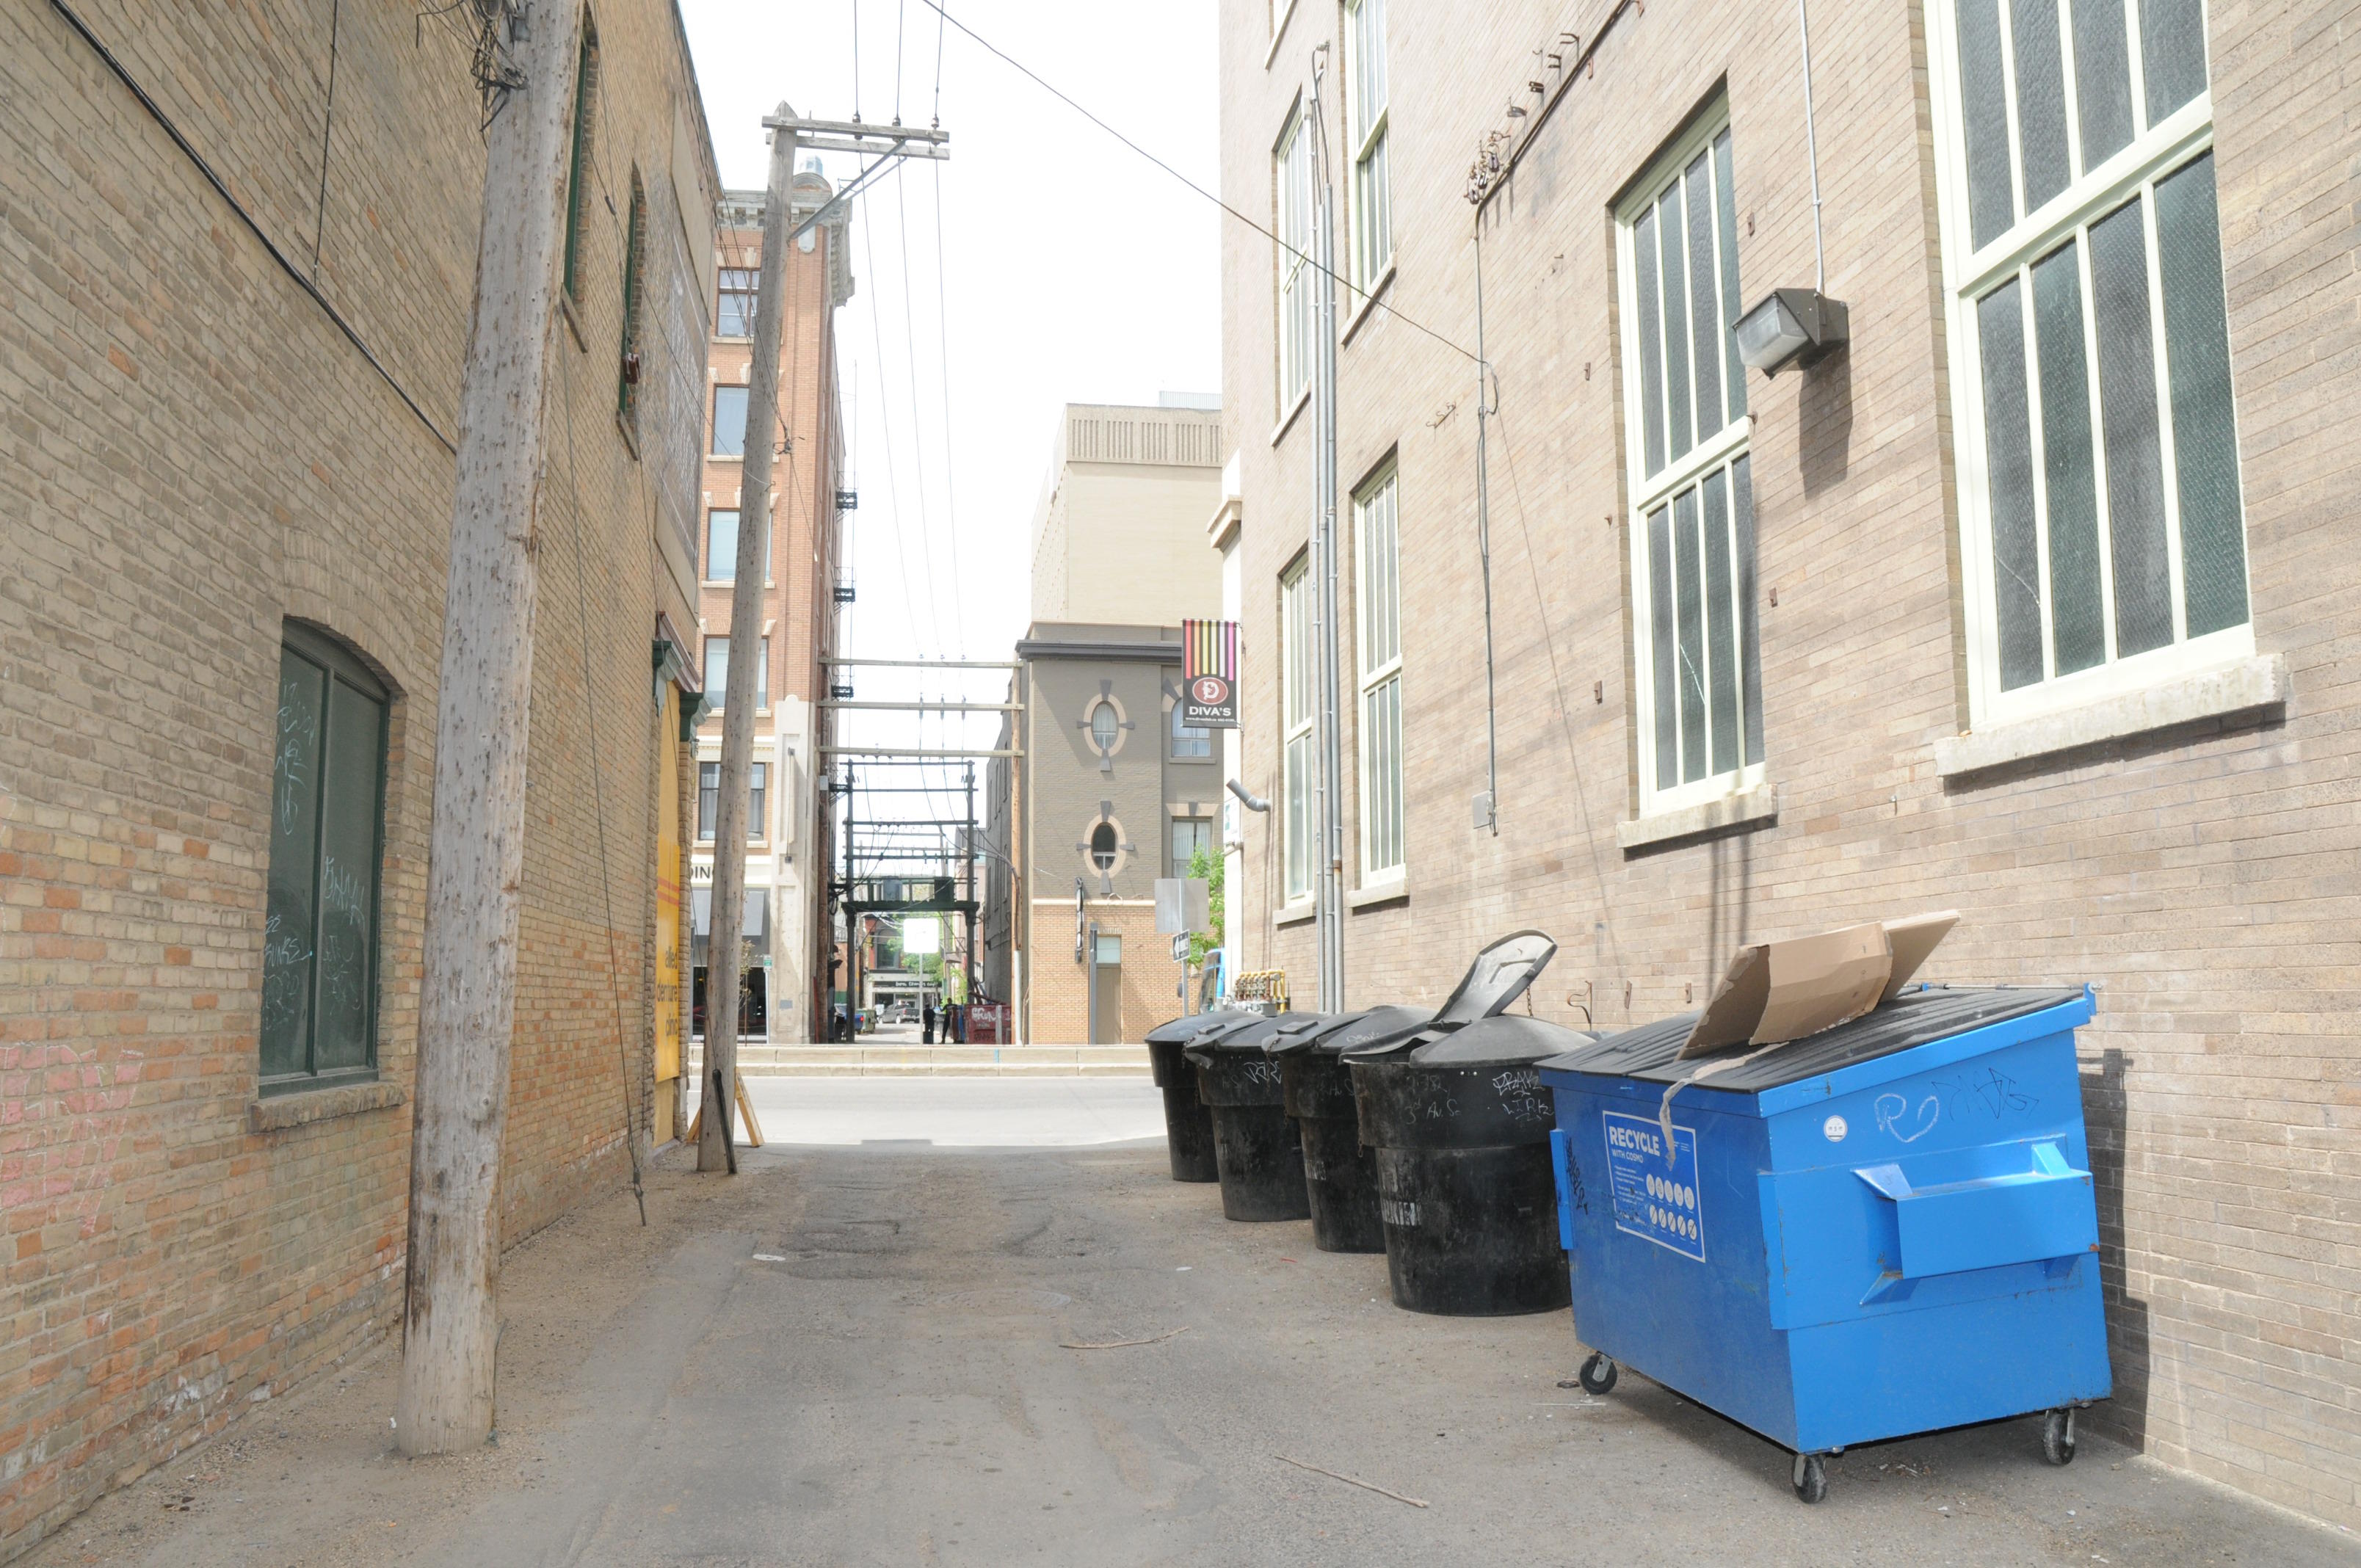 Trash cans and recycling bins line in an alley